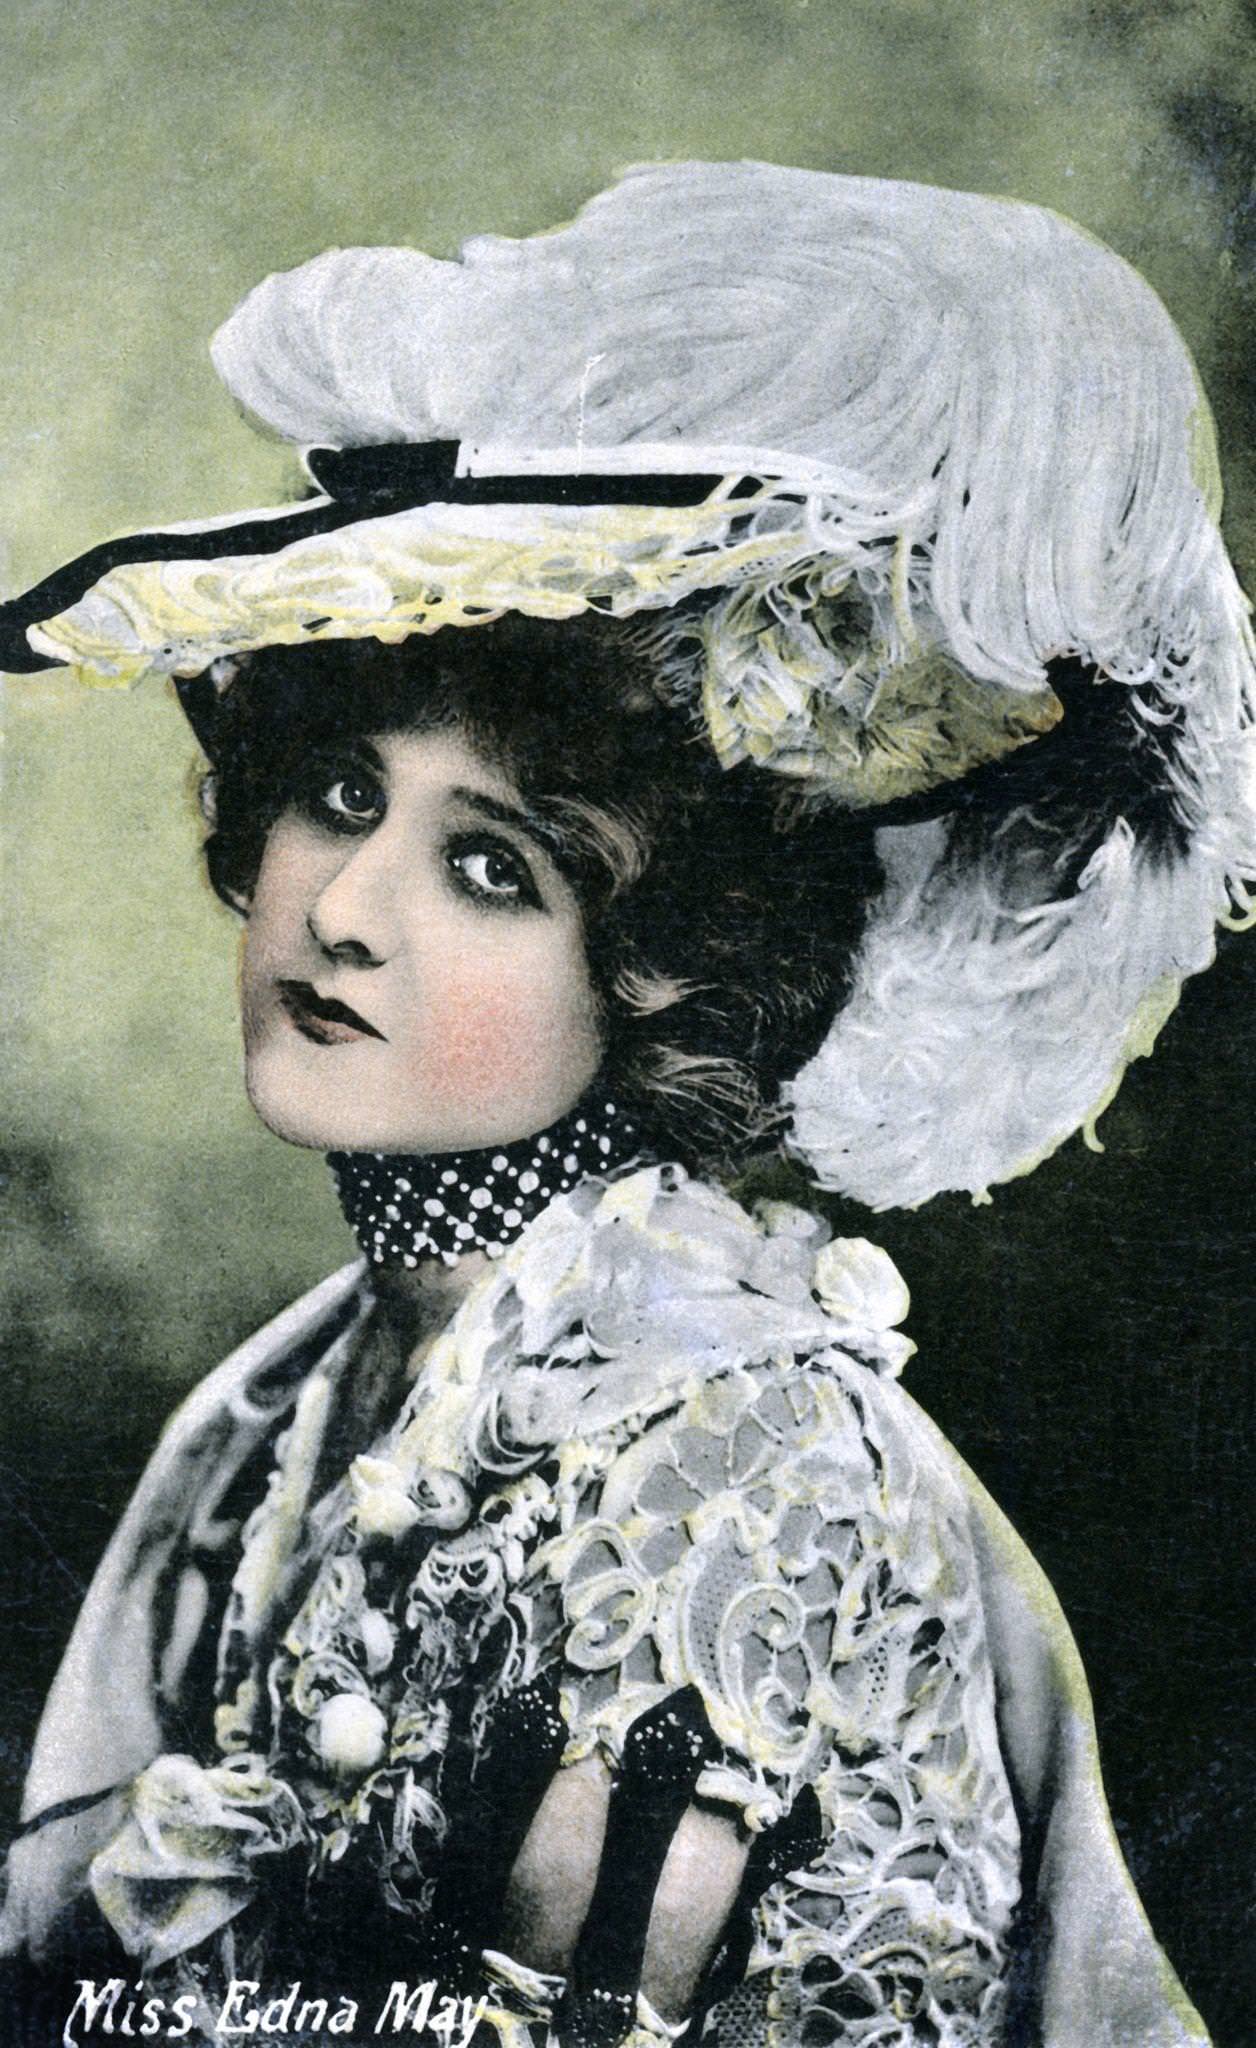 Fanny Dango poses for a portrait in the early 1900s